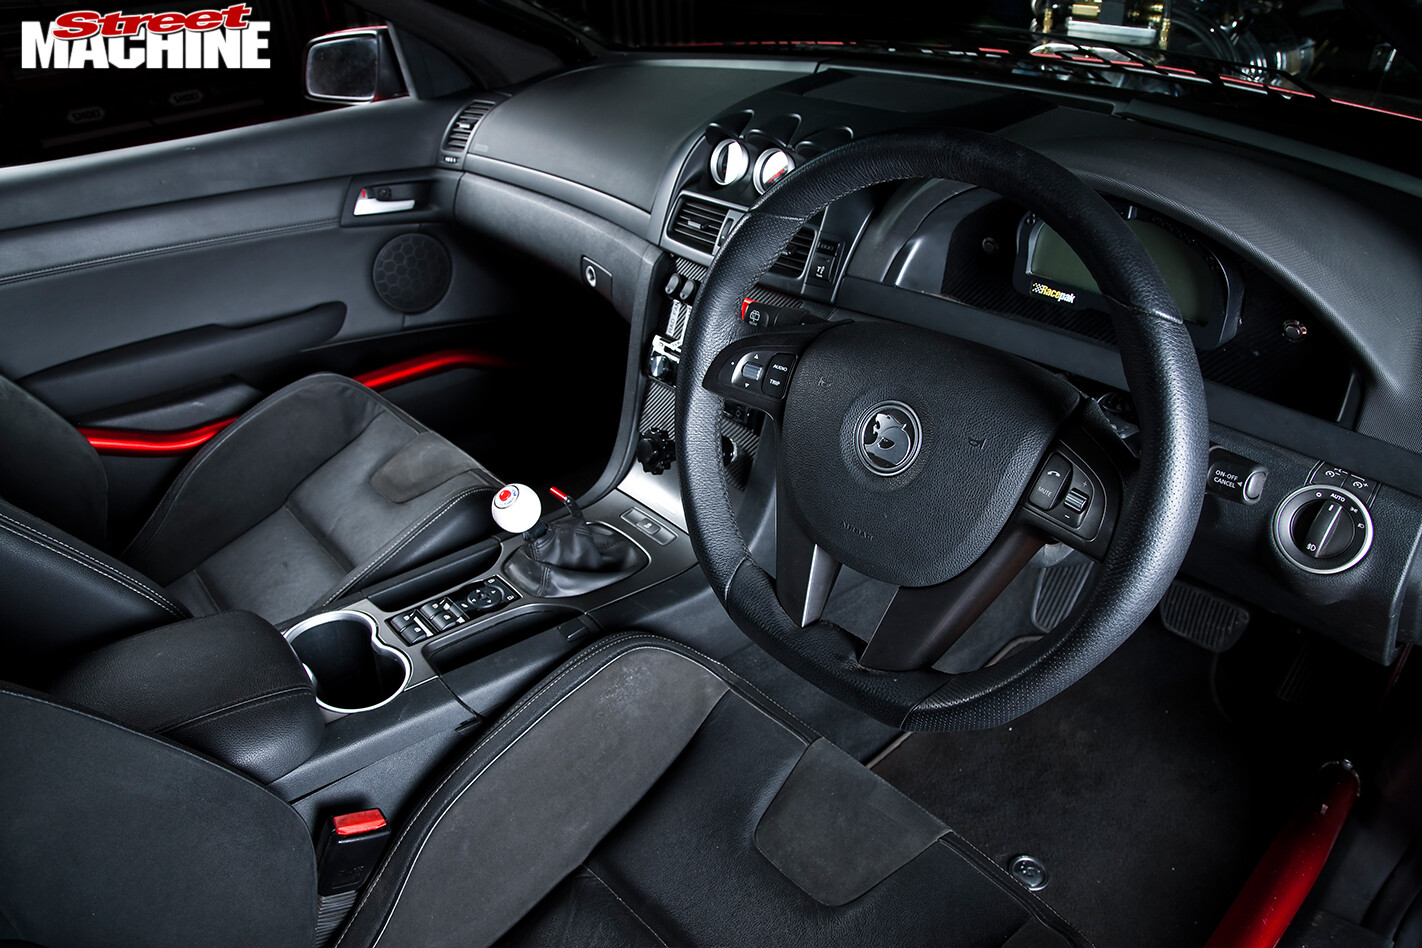 Holden -VE-commodore -wagon -interior -front